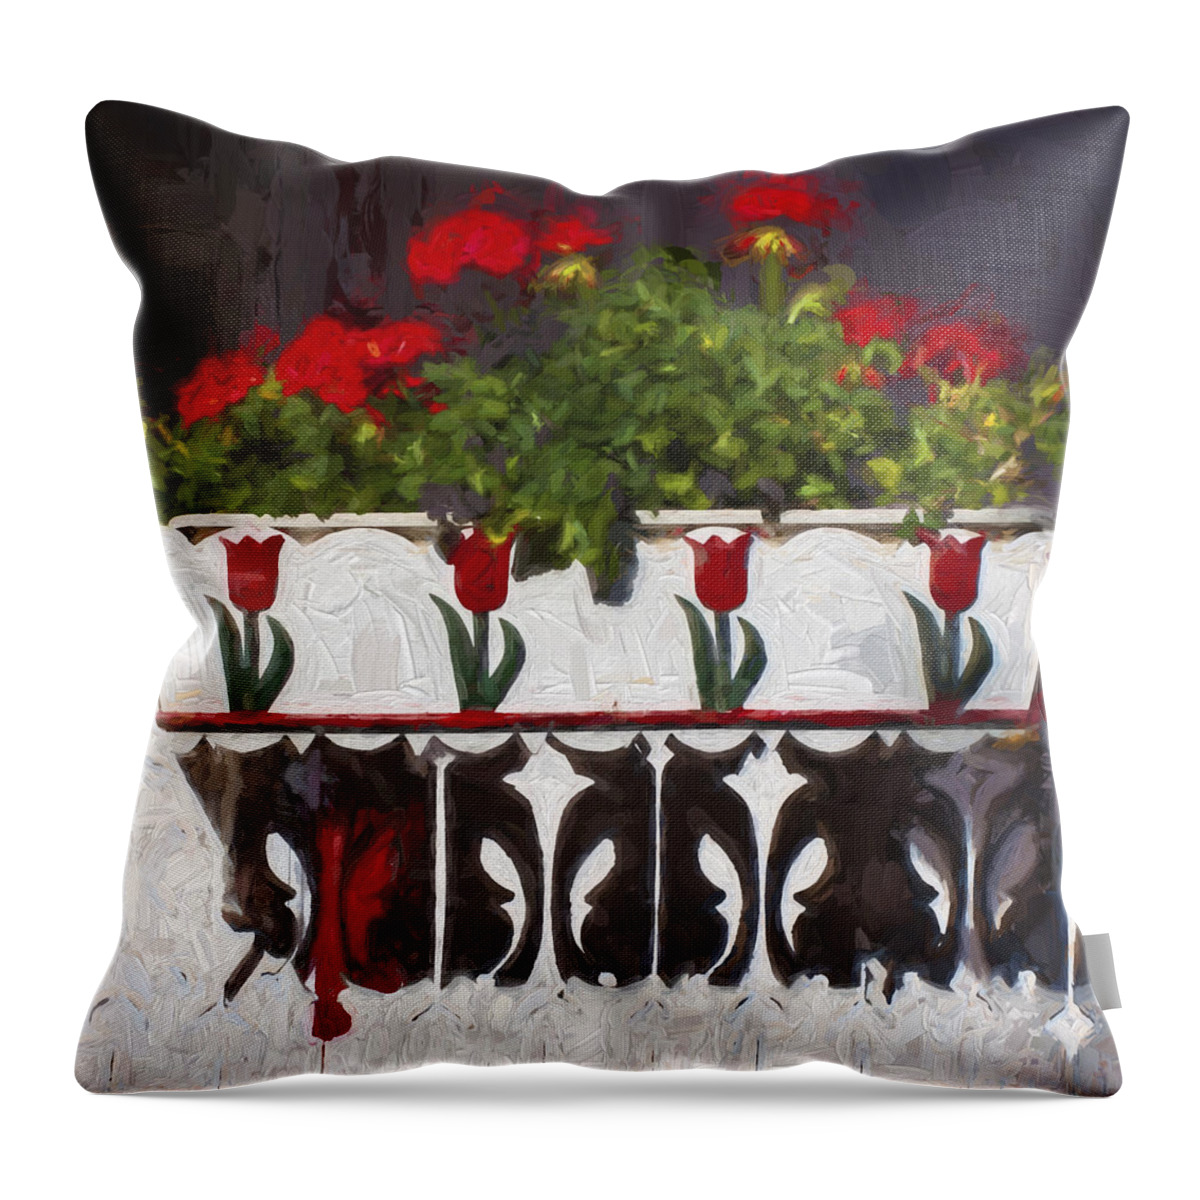 Red Throw Pillow featuring the photograph Church Camp House Detail Painterly Series 6 by Carol Leigh